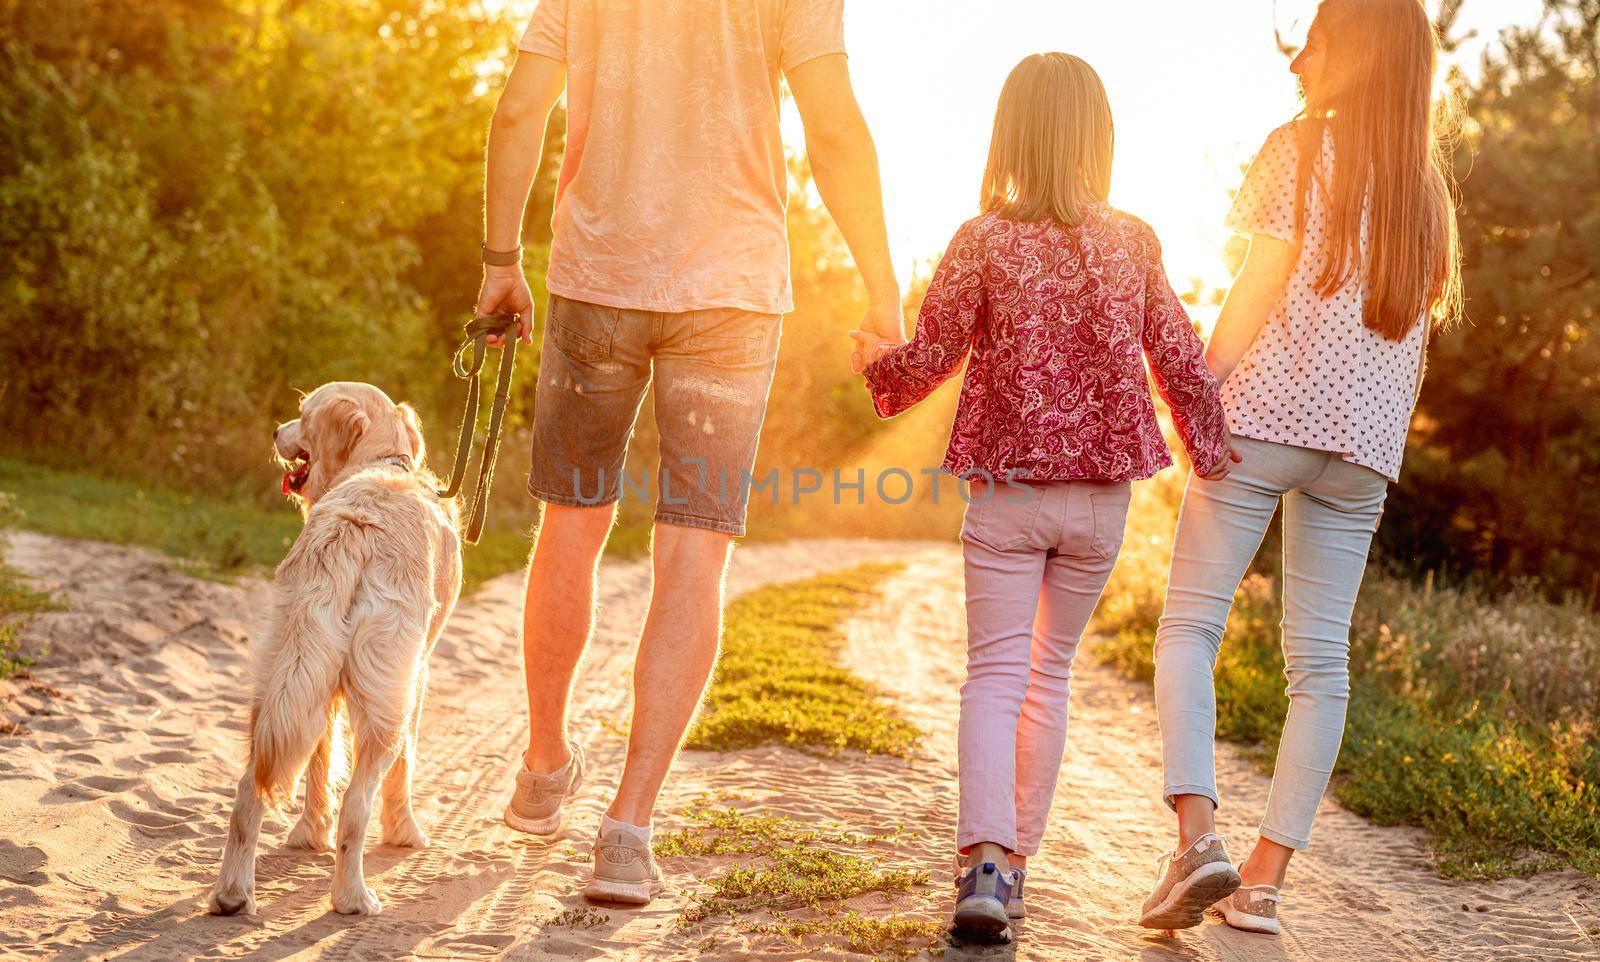 Daughters with father and dog in nature by tan4ikk1